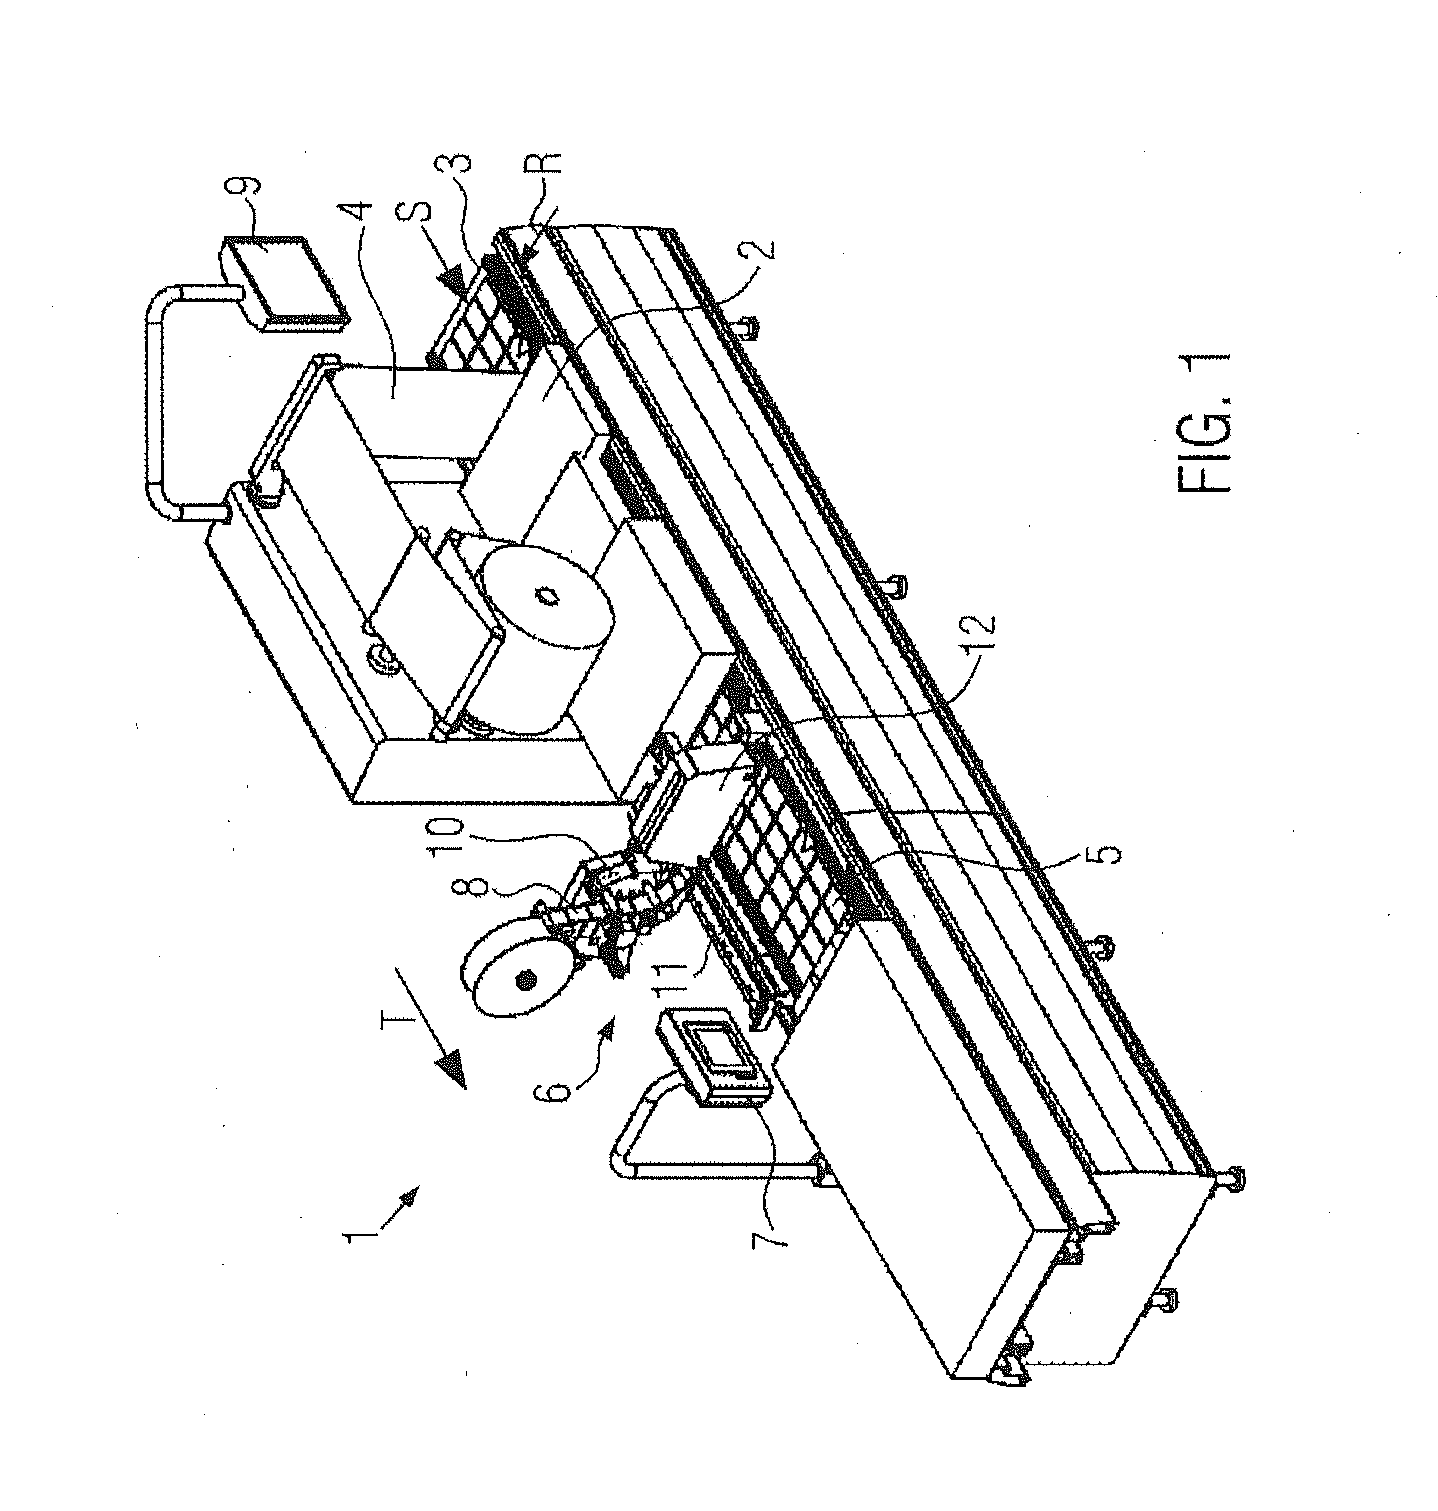 Labeler and method for labeling